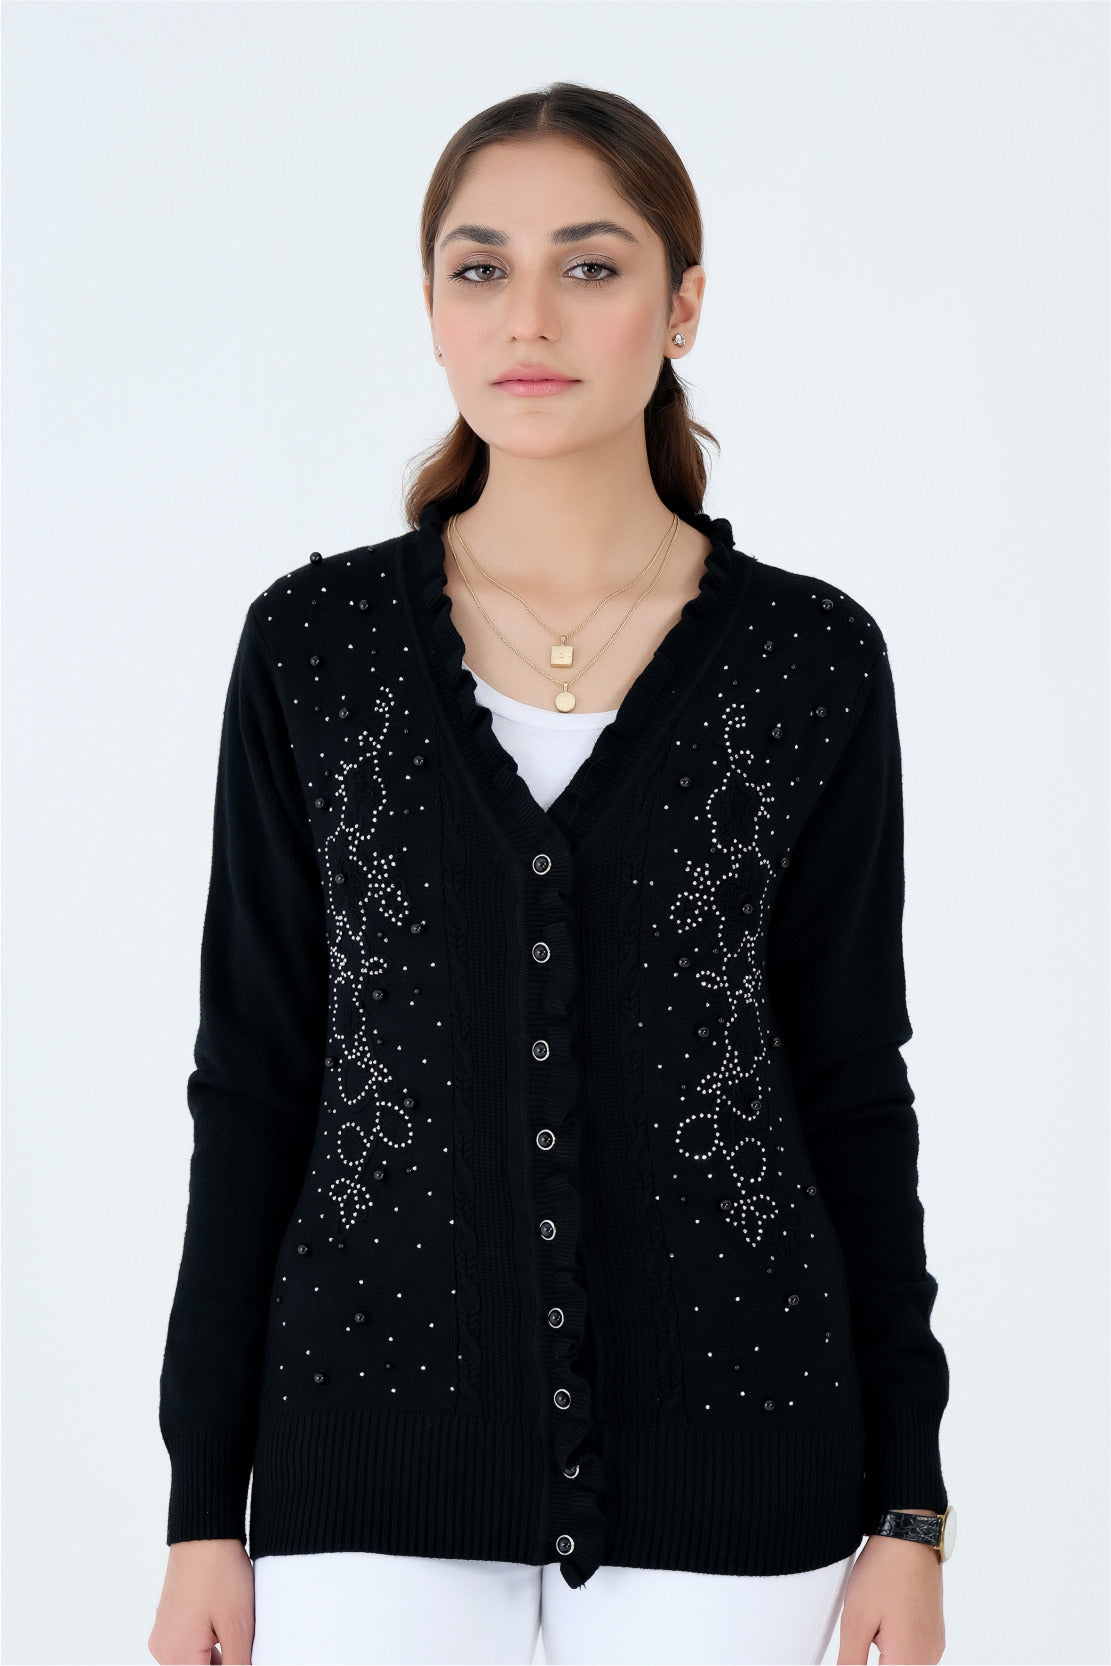 Embroided Black Sweater